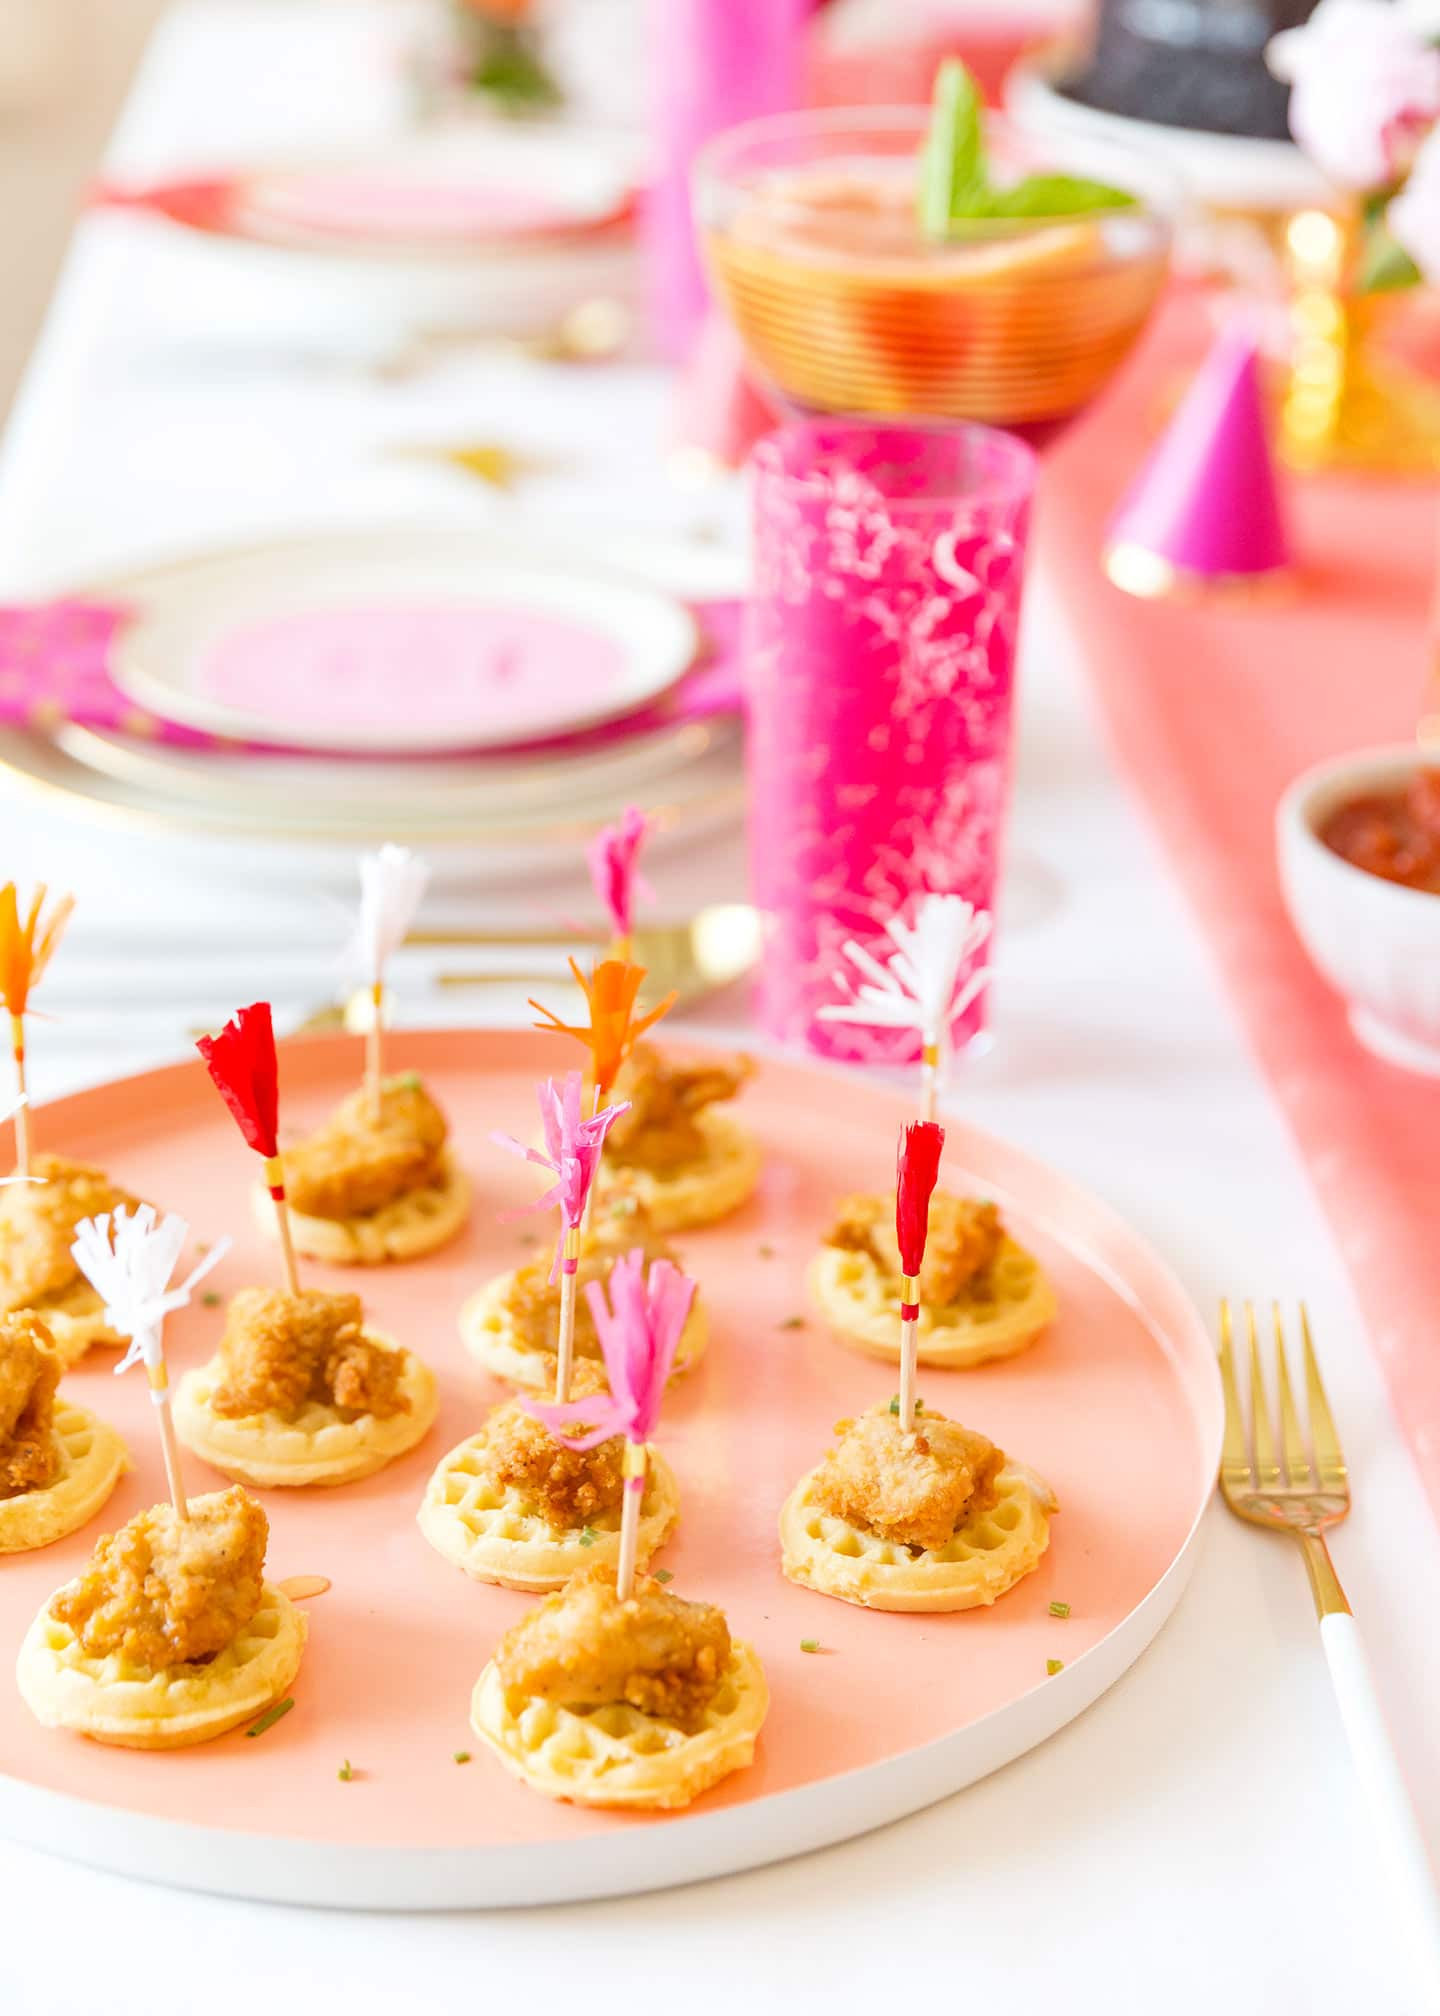 Birthday Party Menu For Adults
 Creative Adult Birthday Party Ideas for the Girls